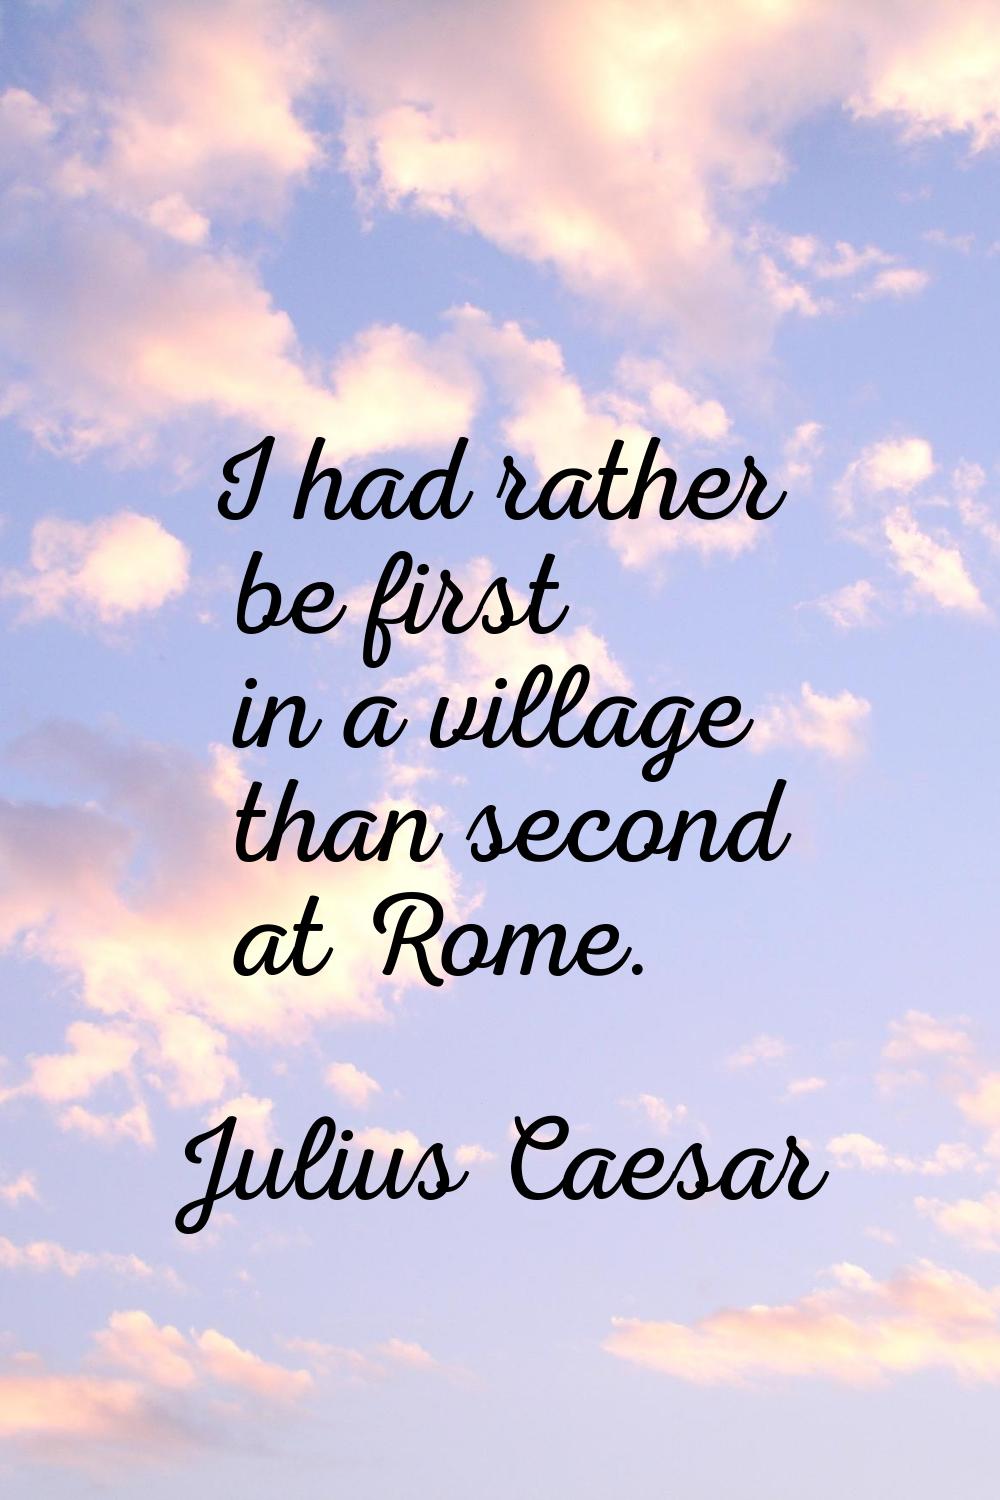 I had rather be first in a village than second at Rome.